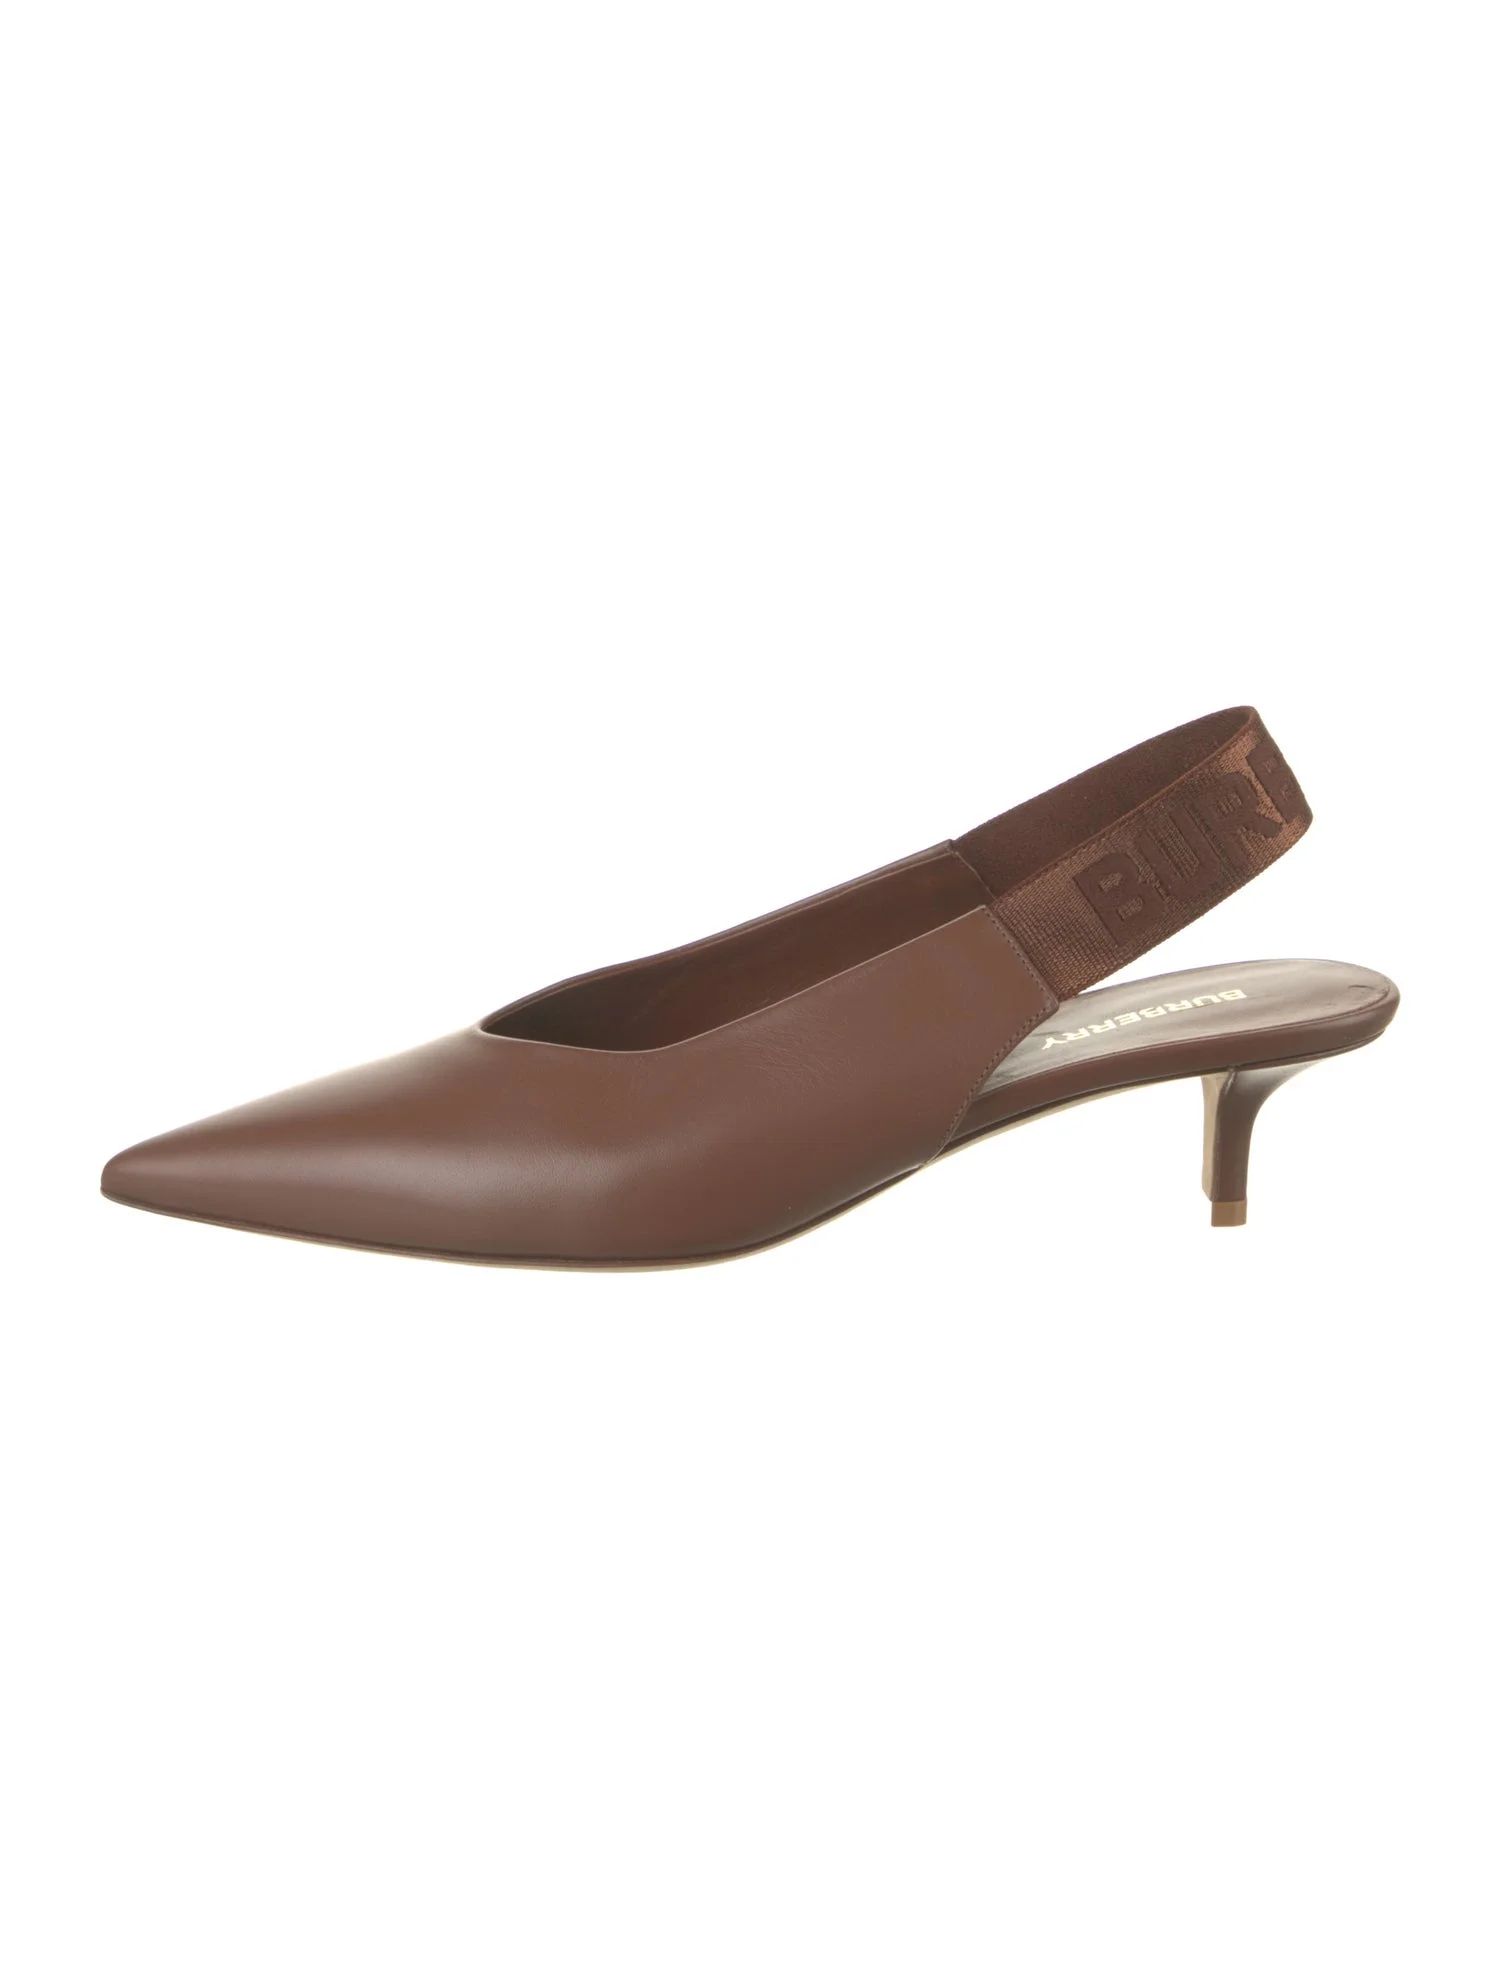 Leather Slingback Pumps | The RealReal